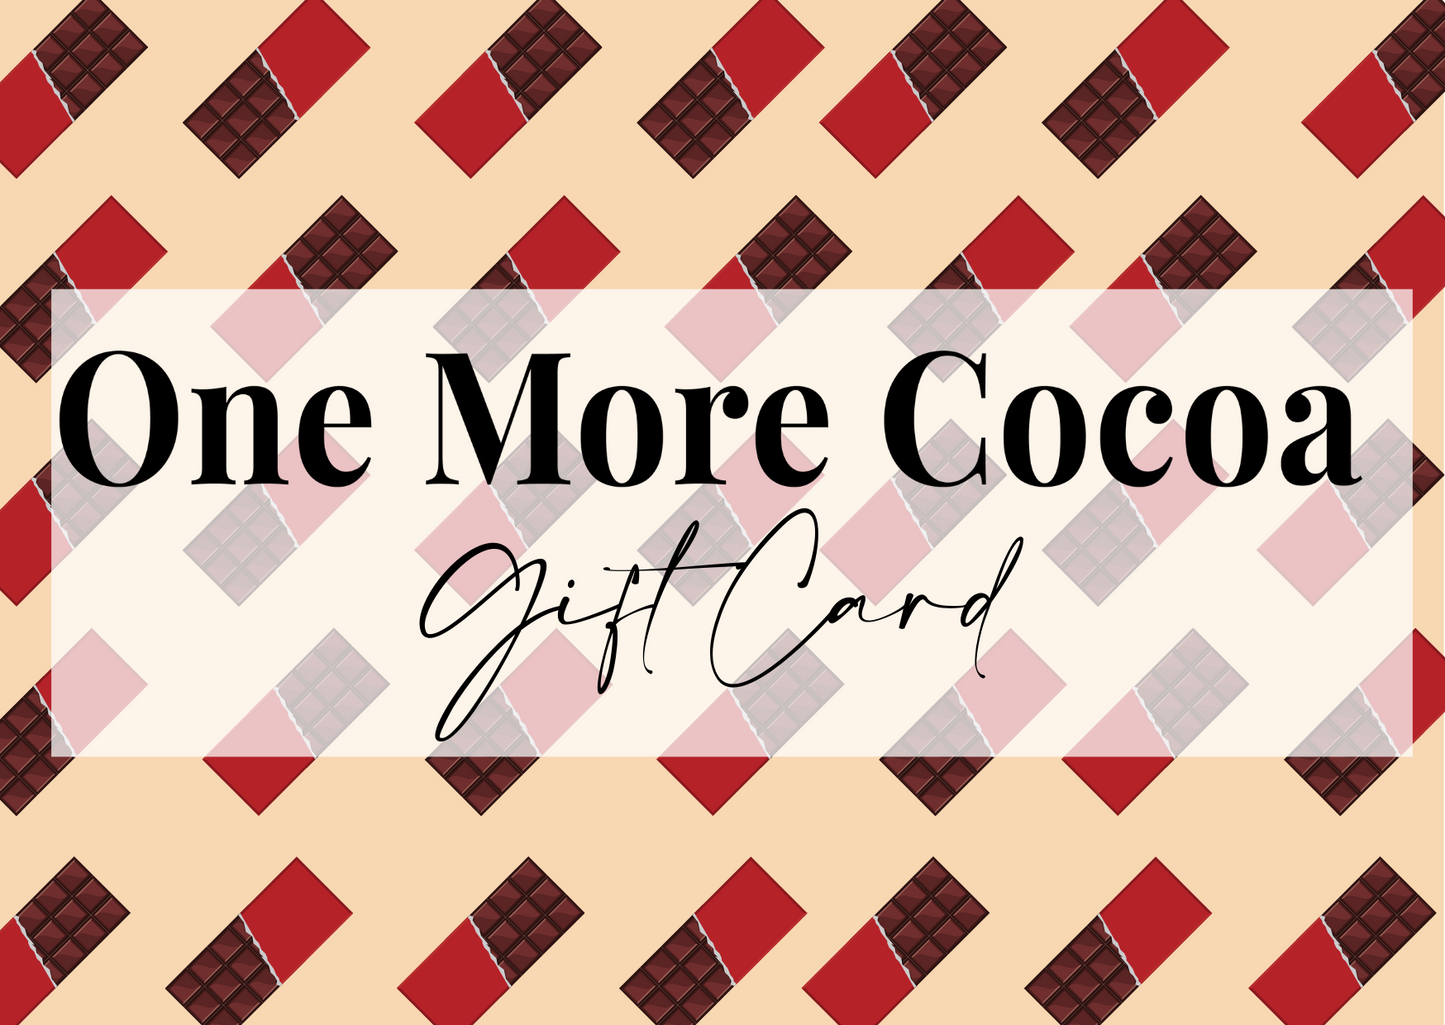 One More Cocoa Gift Card